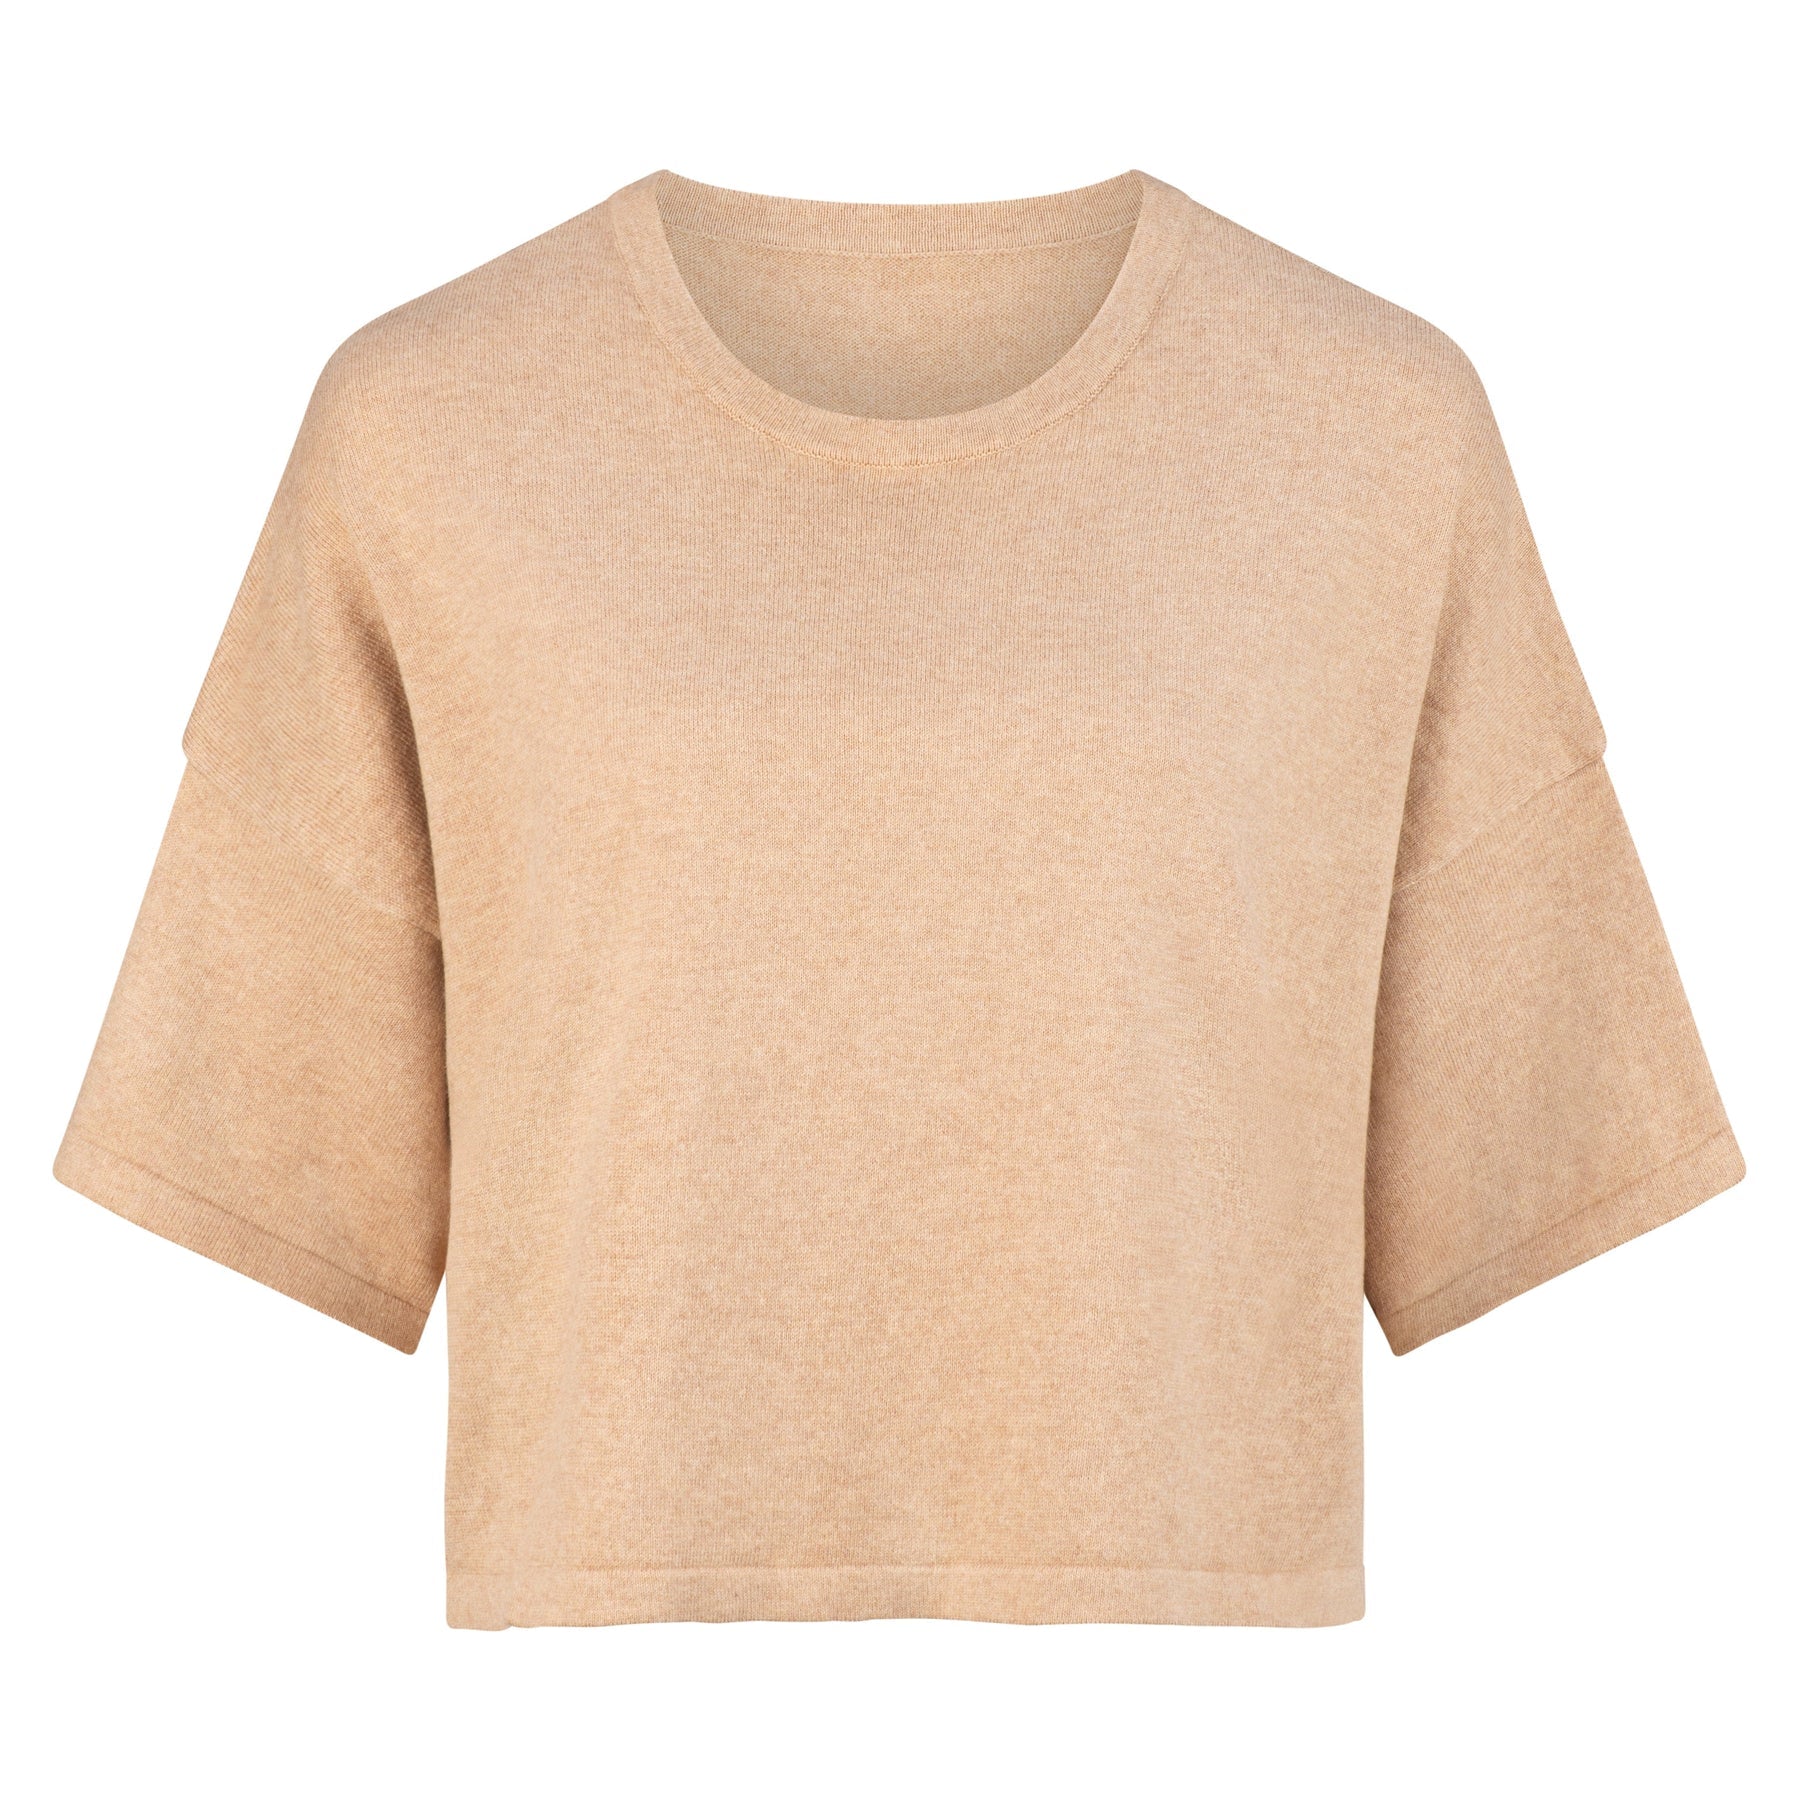 Short sleeve cotton and cashmere blend boxy jumper with crew neckline